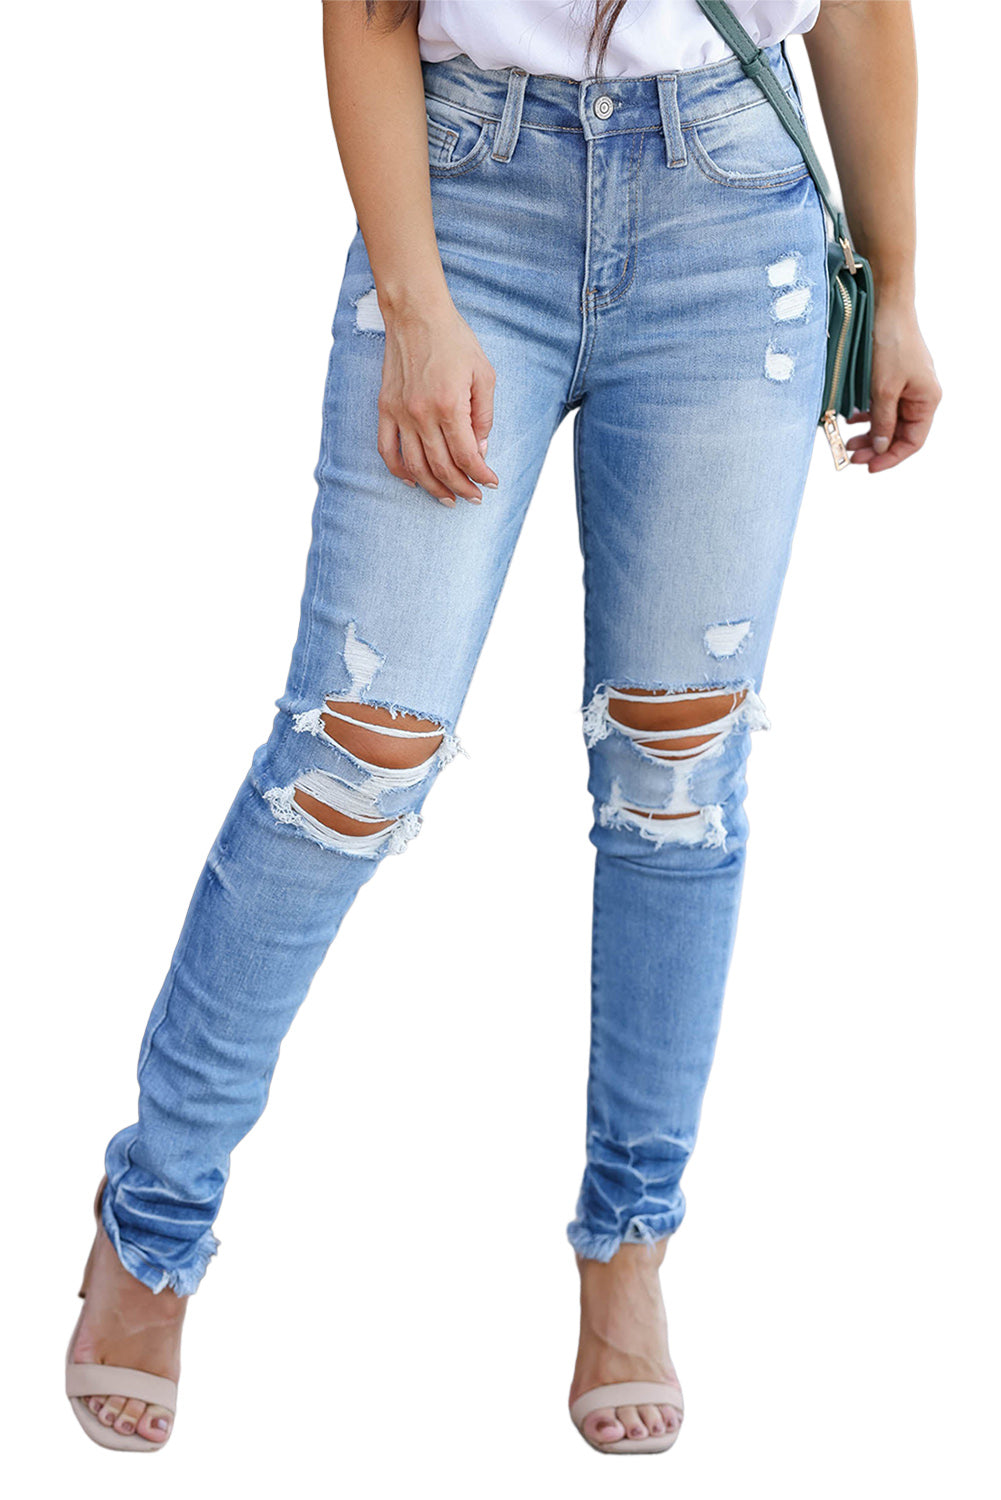 Light Blue Vintage Distressed Ripped Skinny Jeans - women's jeans at TFC&H Co.